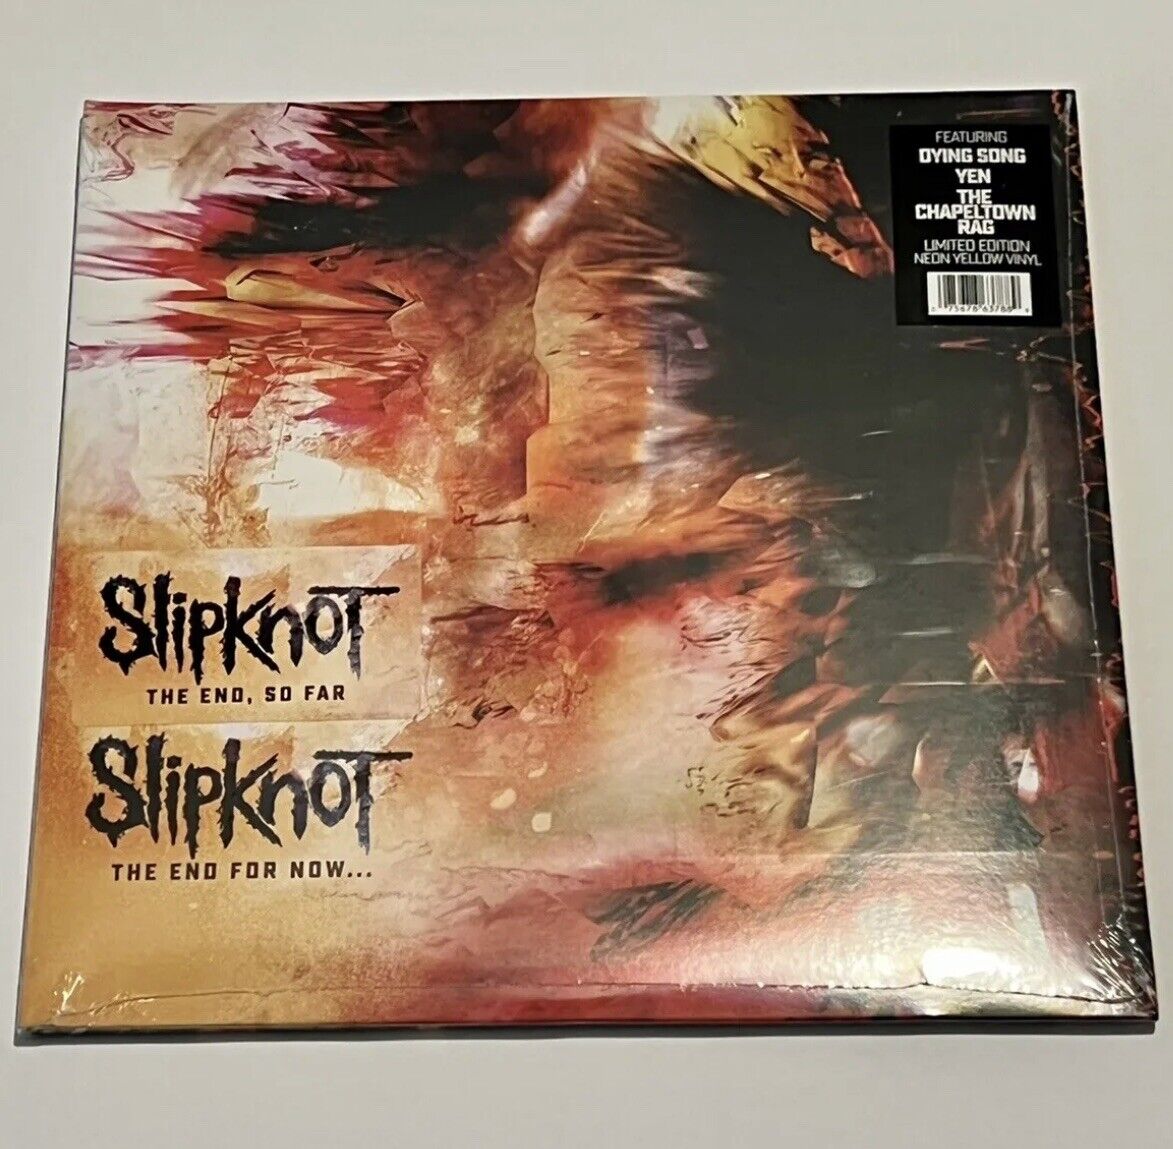 (ERROR) Slipknot The End, So Far Limited Edition Neon Yellow Vinyl For Now